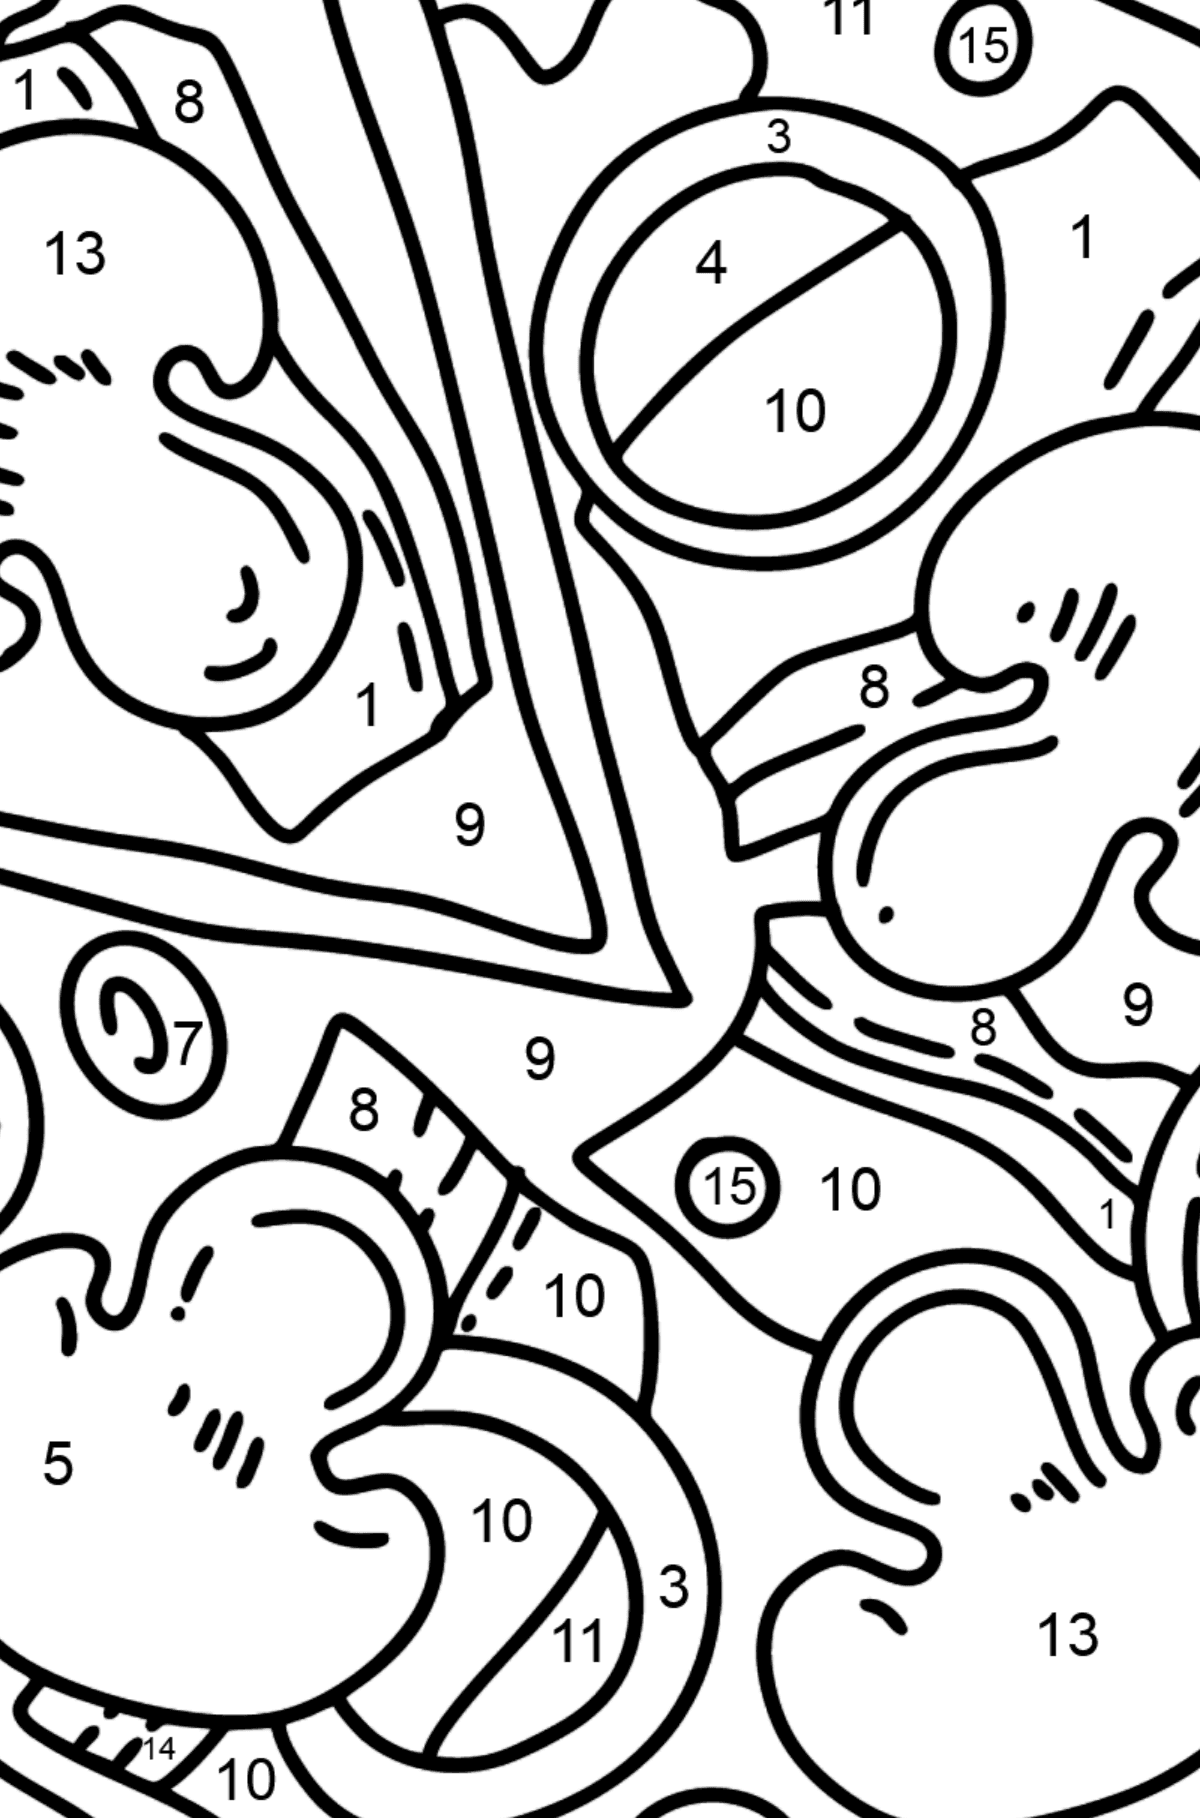 Pizza with Mushrooms coloring page - Coloring by Numbers for Kids